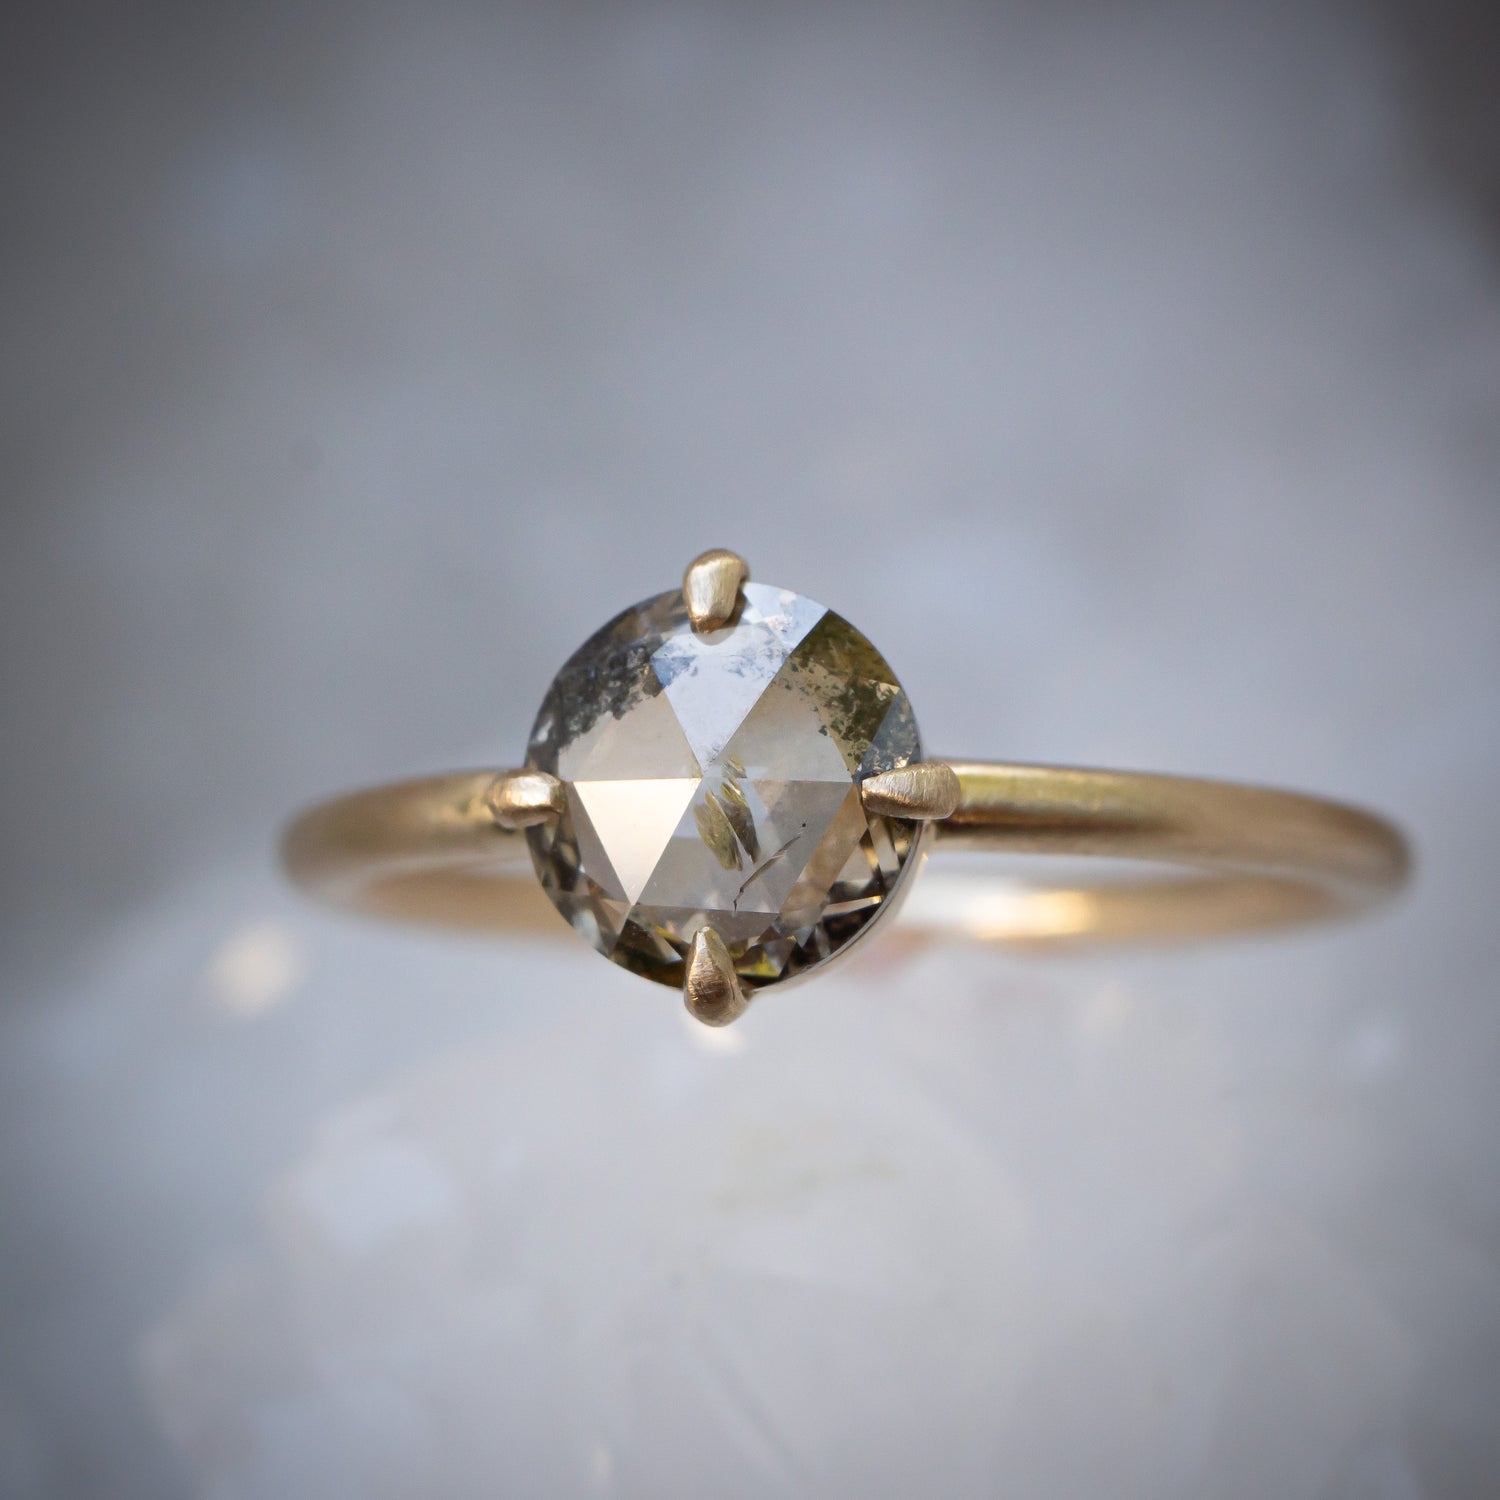 Salt and pepper round diamond ring yellow gold compass ring